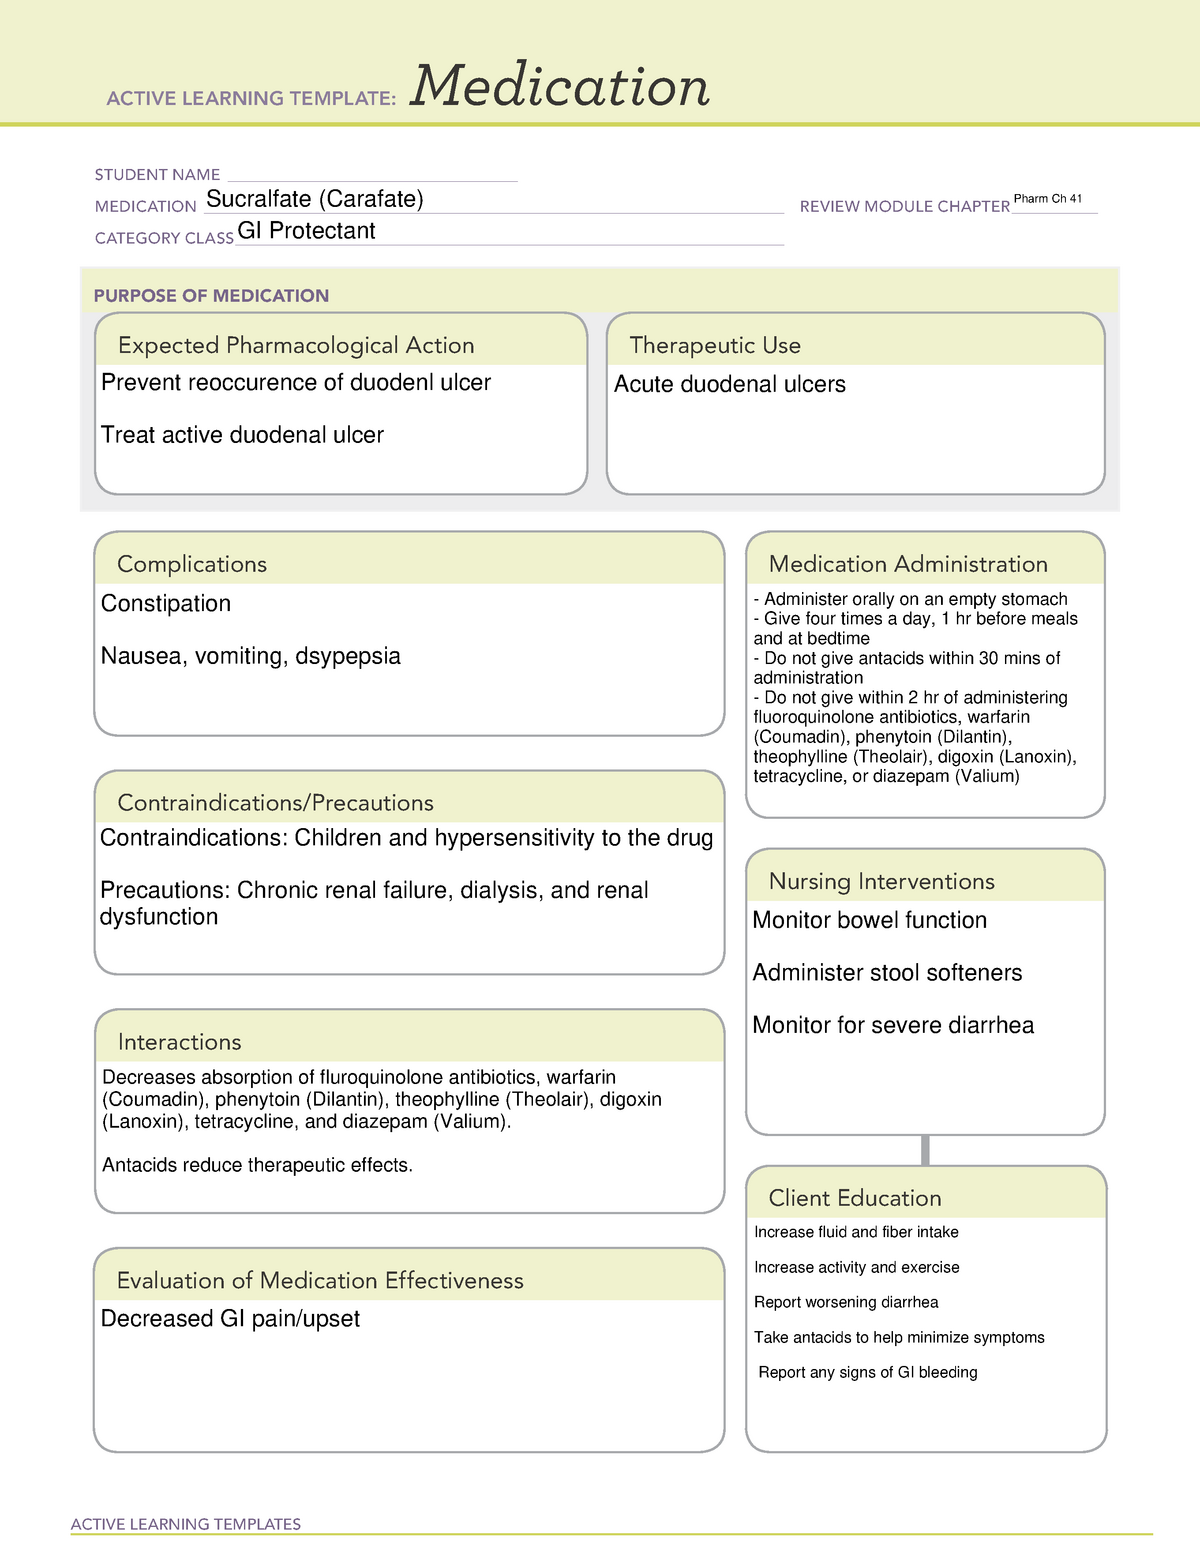 Medication Card Carafate on ATI Template ACTIVE LEARNING TEMPLATES